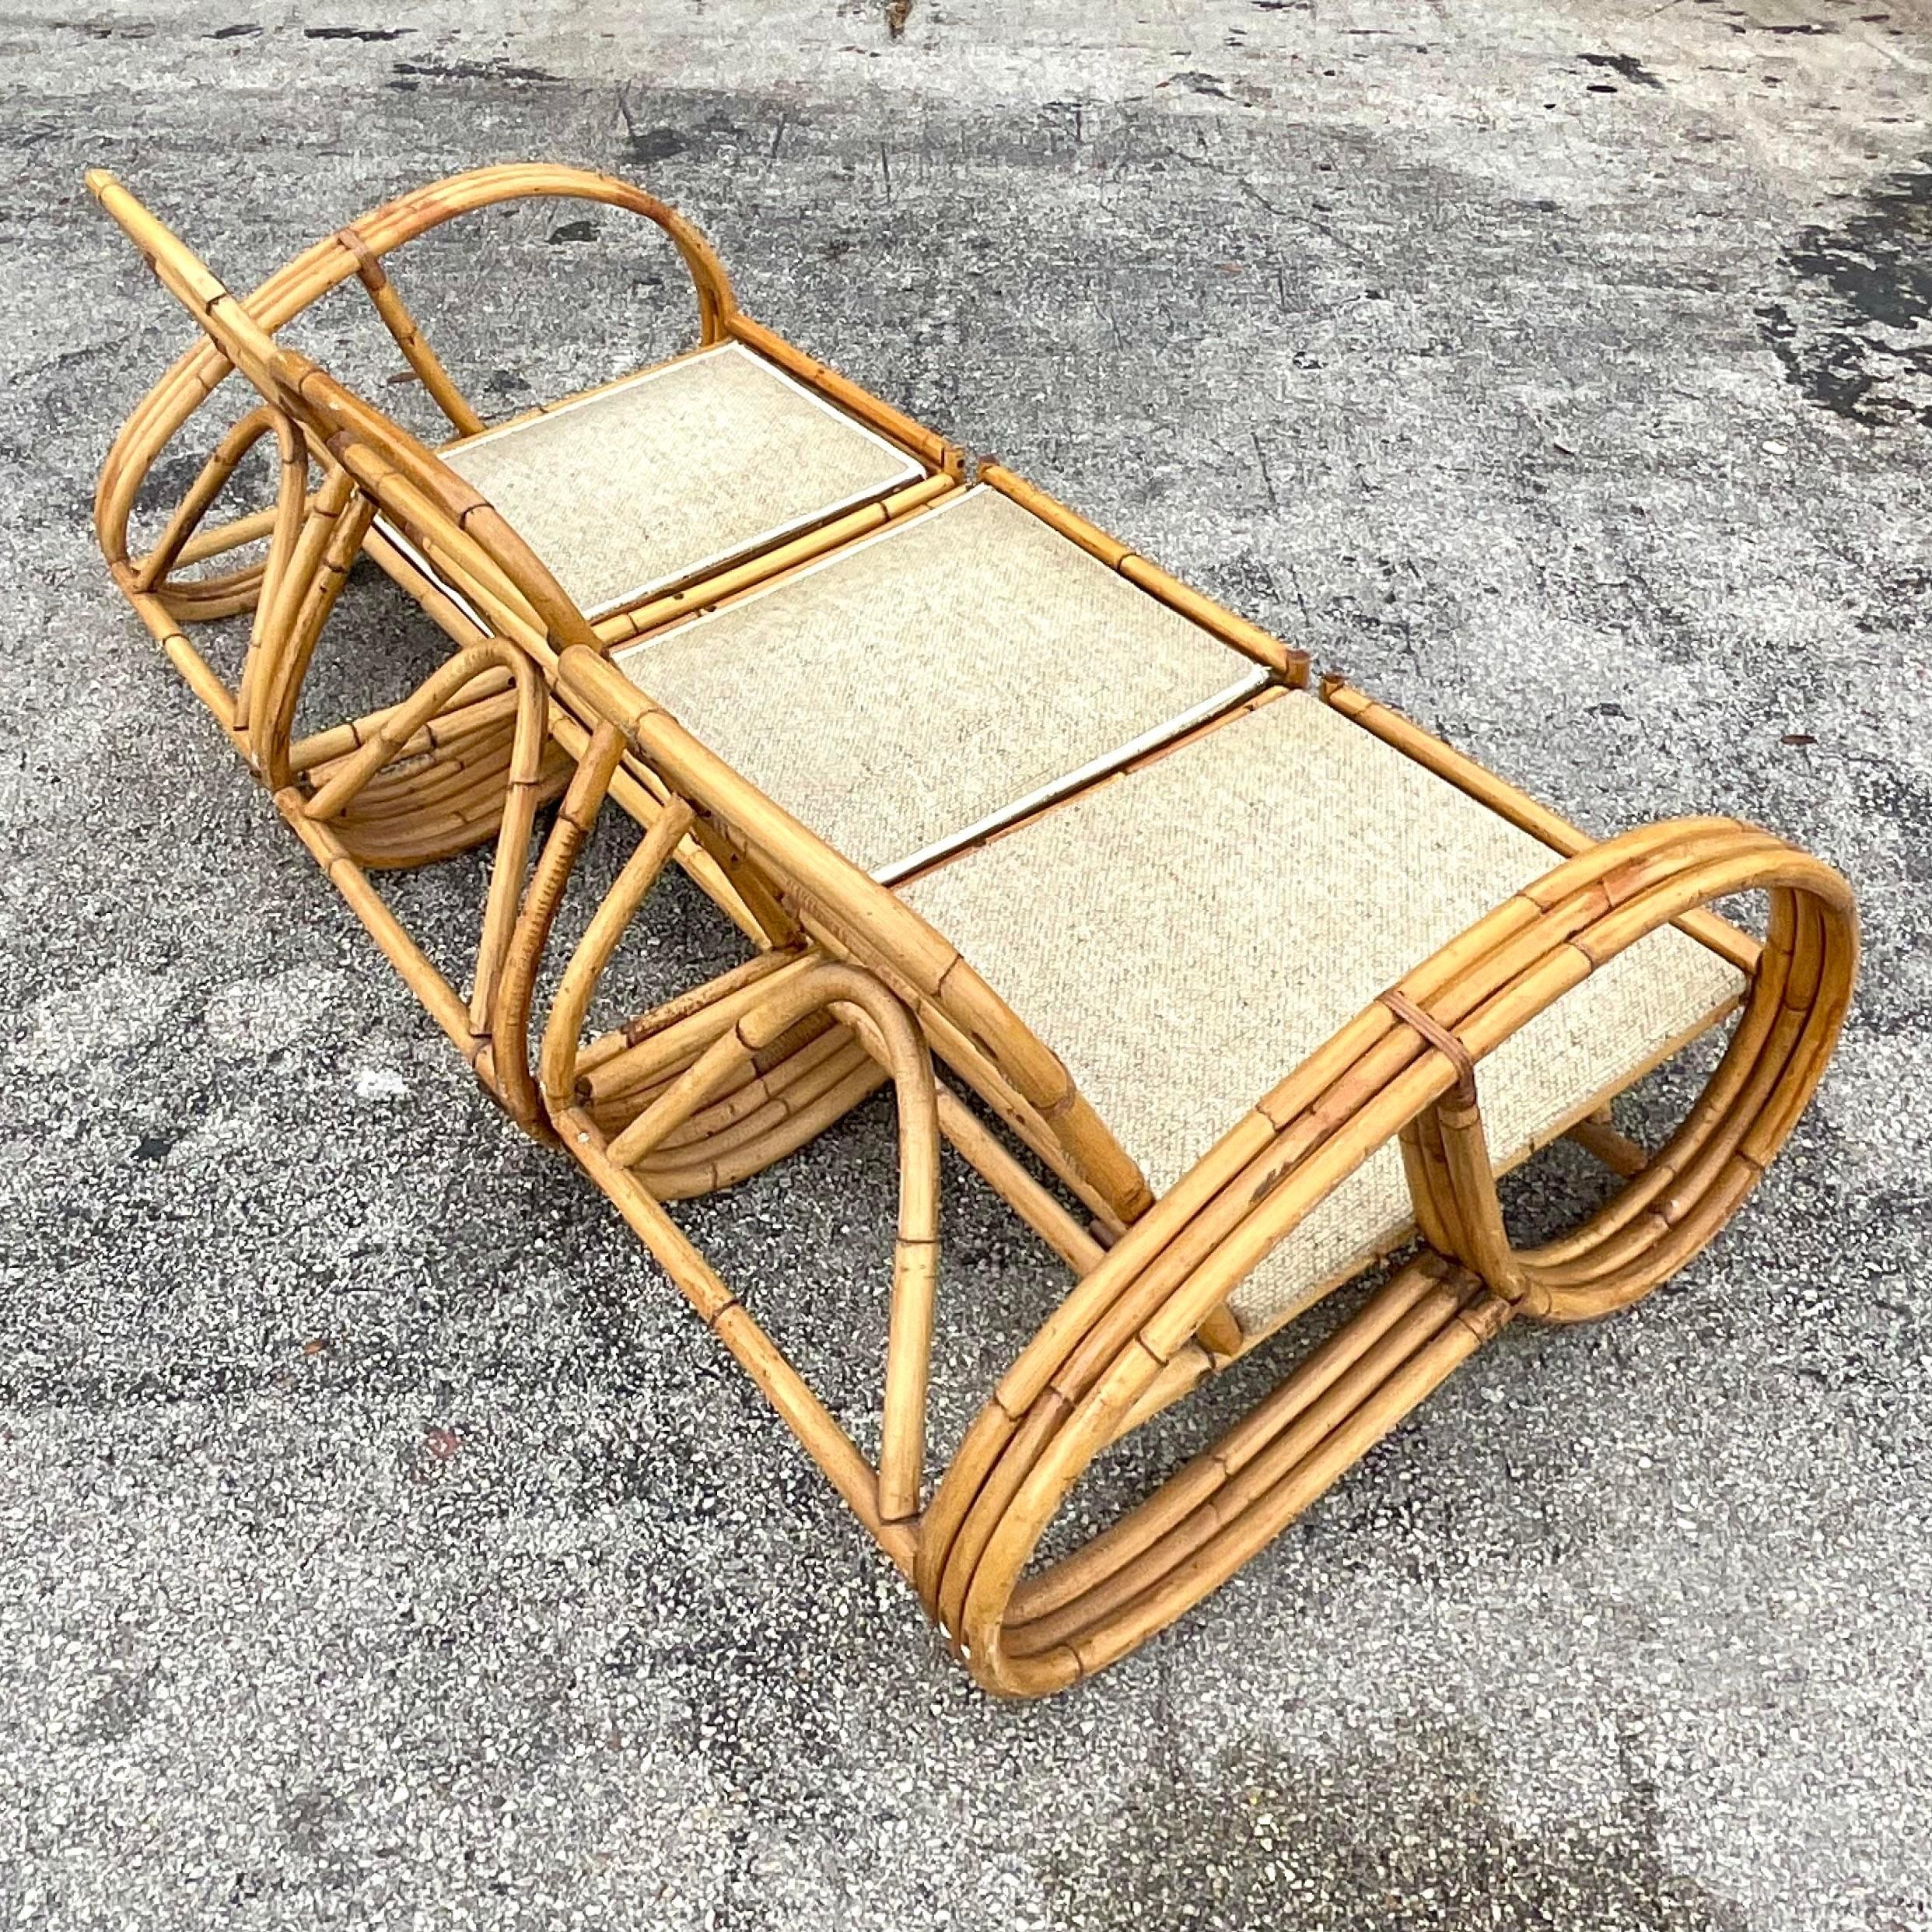 Vintage Coastal Bent Rattan Sofa With Cabana Striped Cushions In Good Condition For Sale In west palm beach, FL